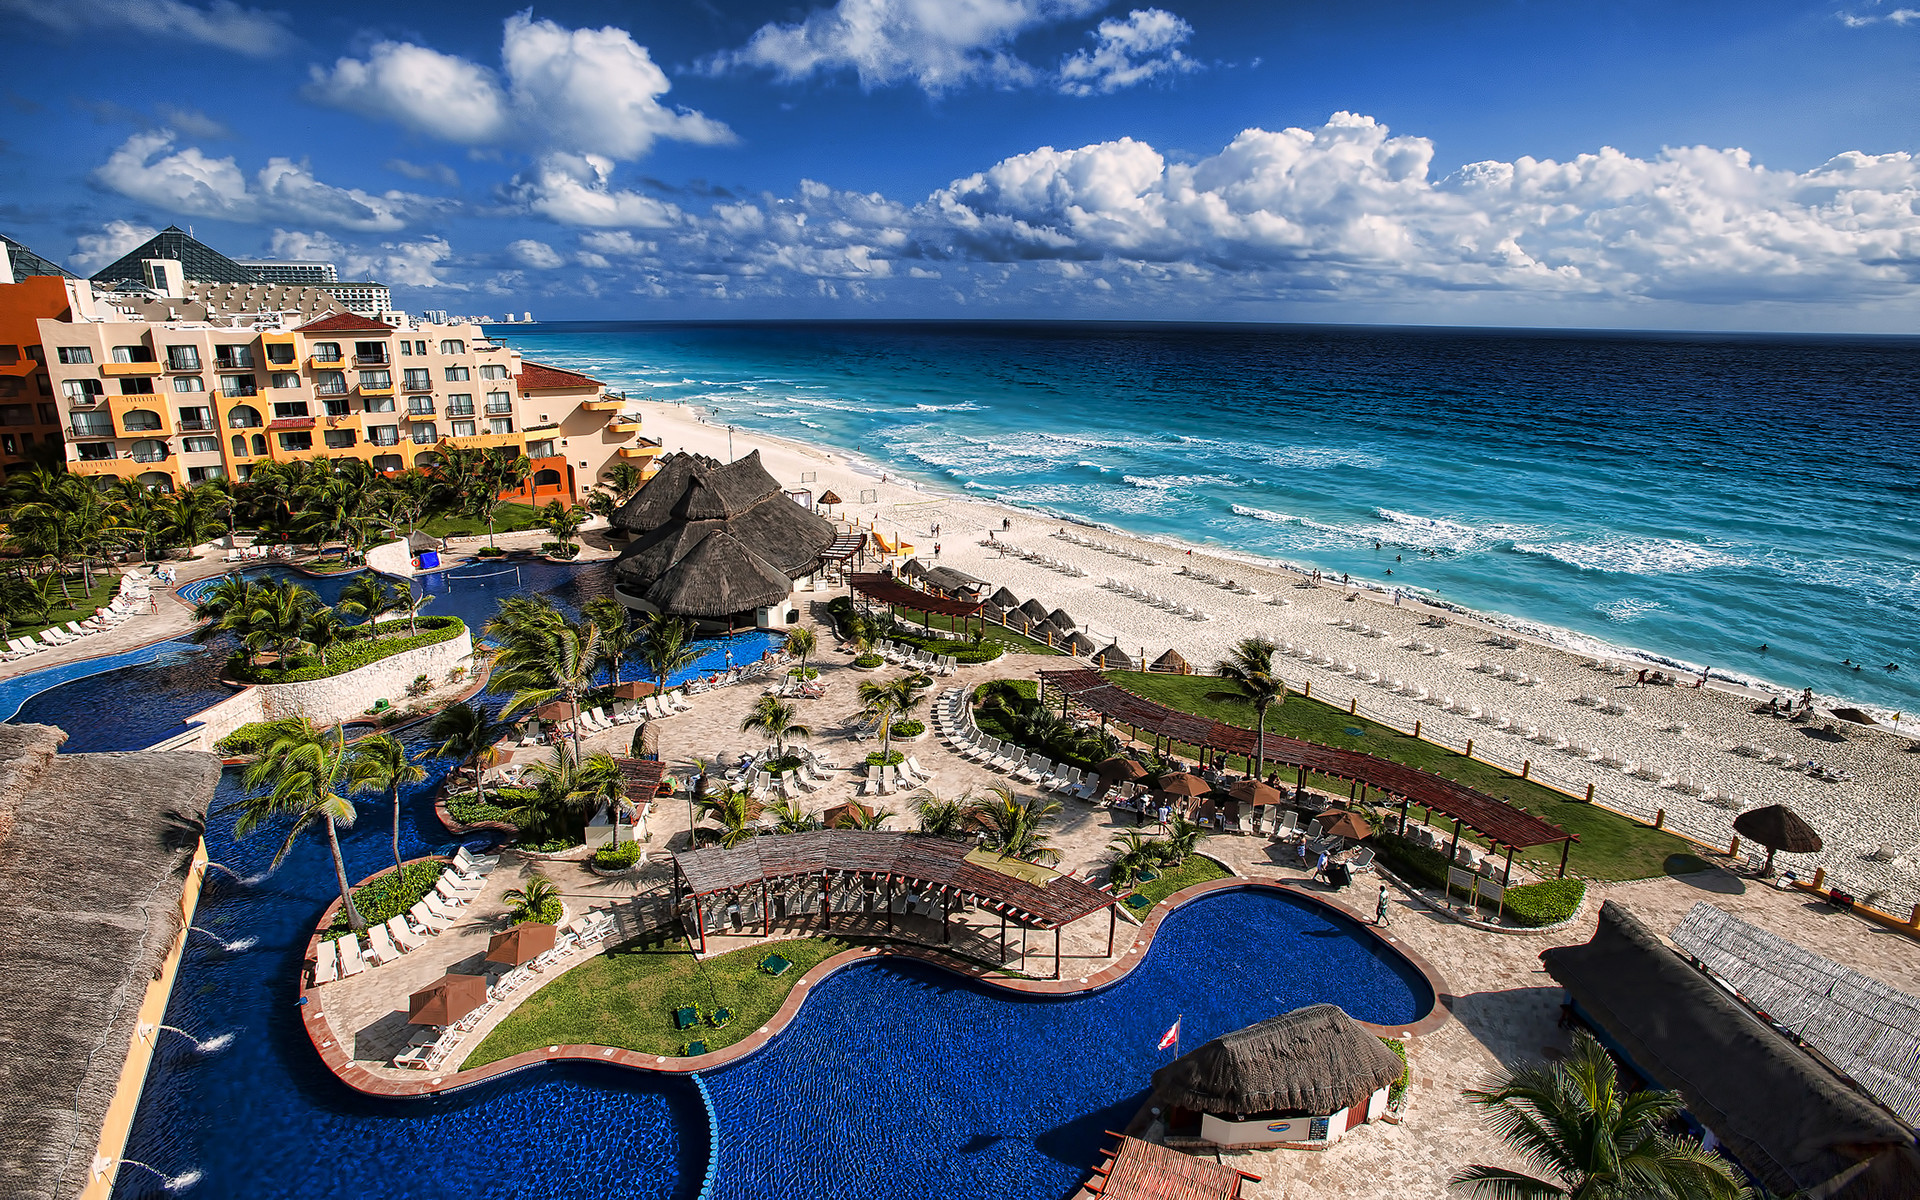 1920x1200 Tropical hotel pool area (Cancun or Playa Mujeres?